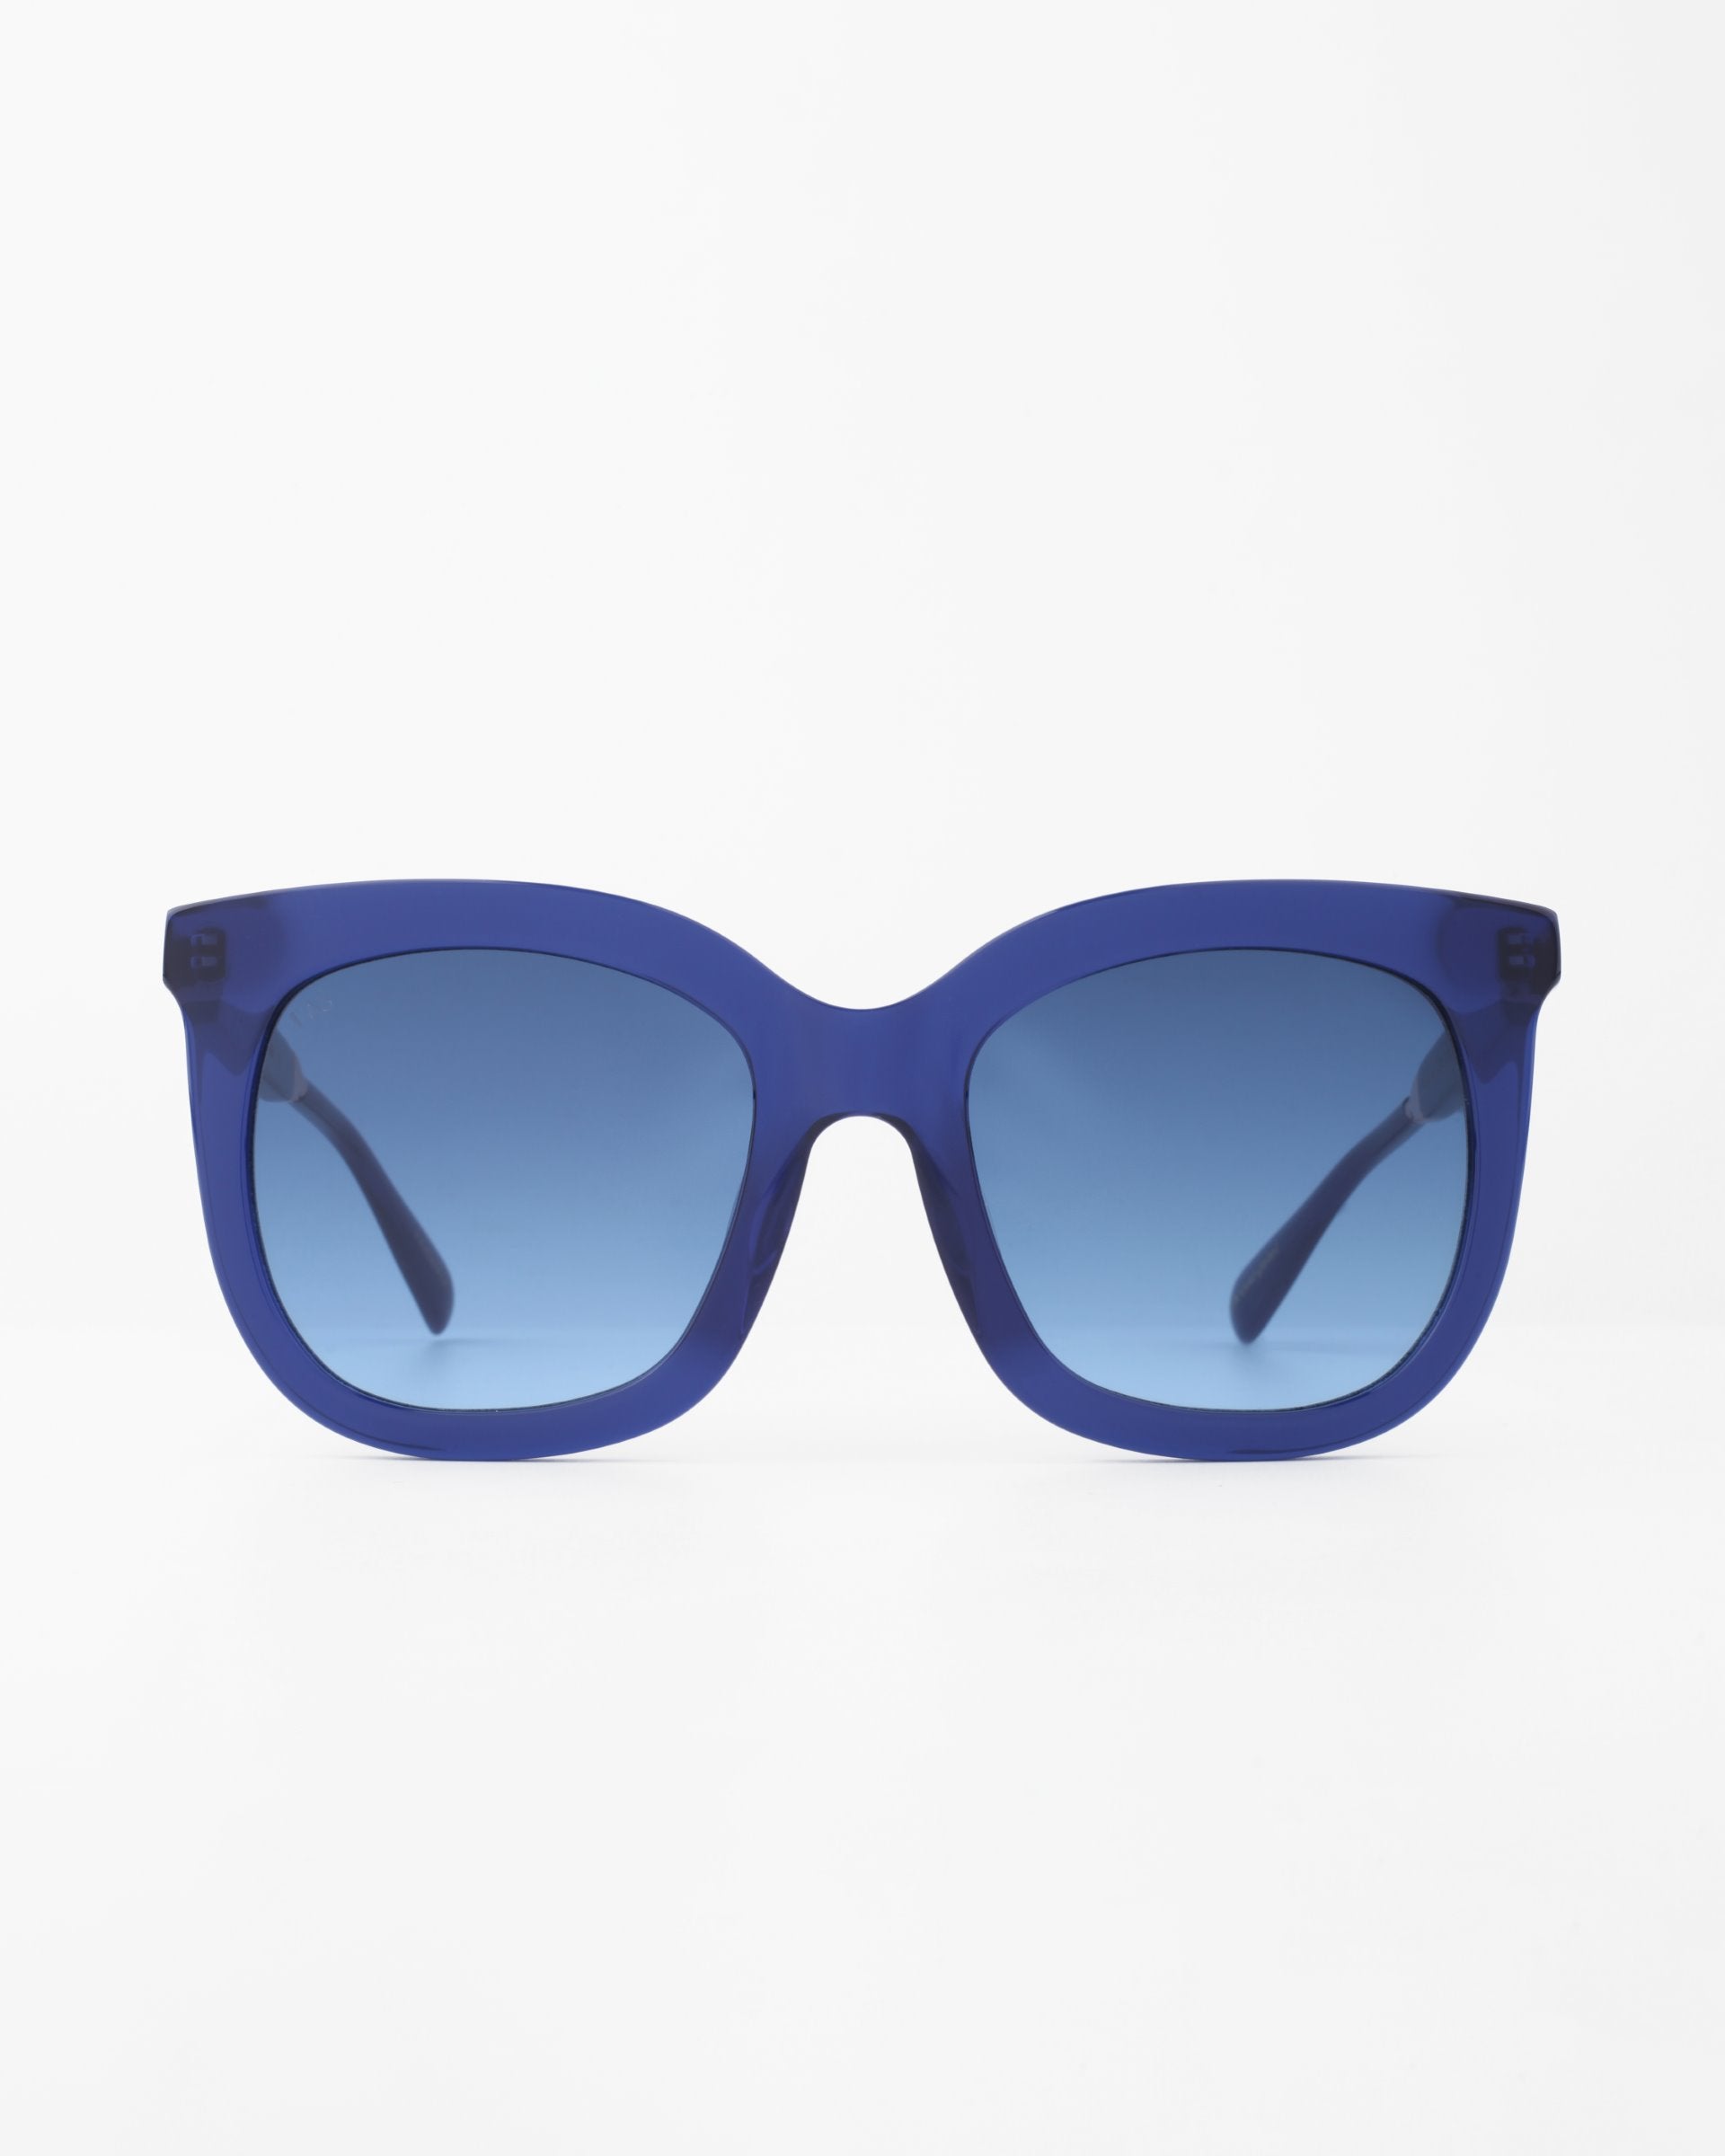 A pair of For Art's Sake® Riverside square-shaped sunglasses with a blue frame and blue-tinted, shatter-resistant lenses is centered against a white background. The sunglasses have a minimalist and modern design.